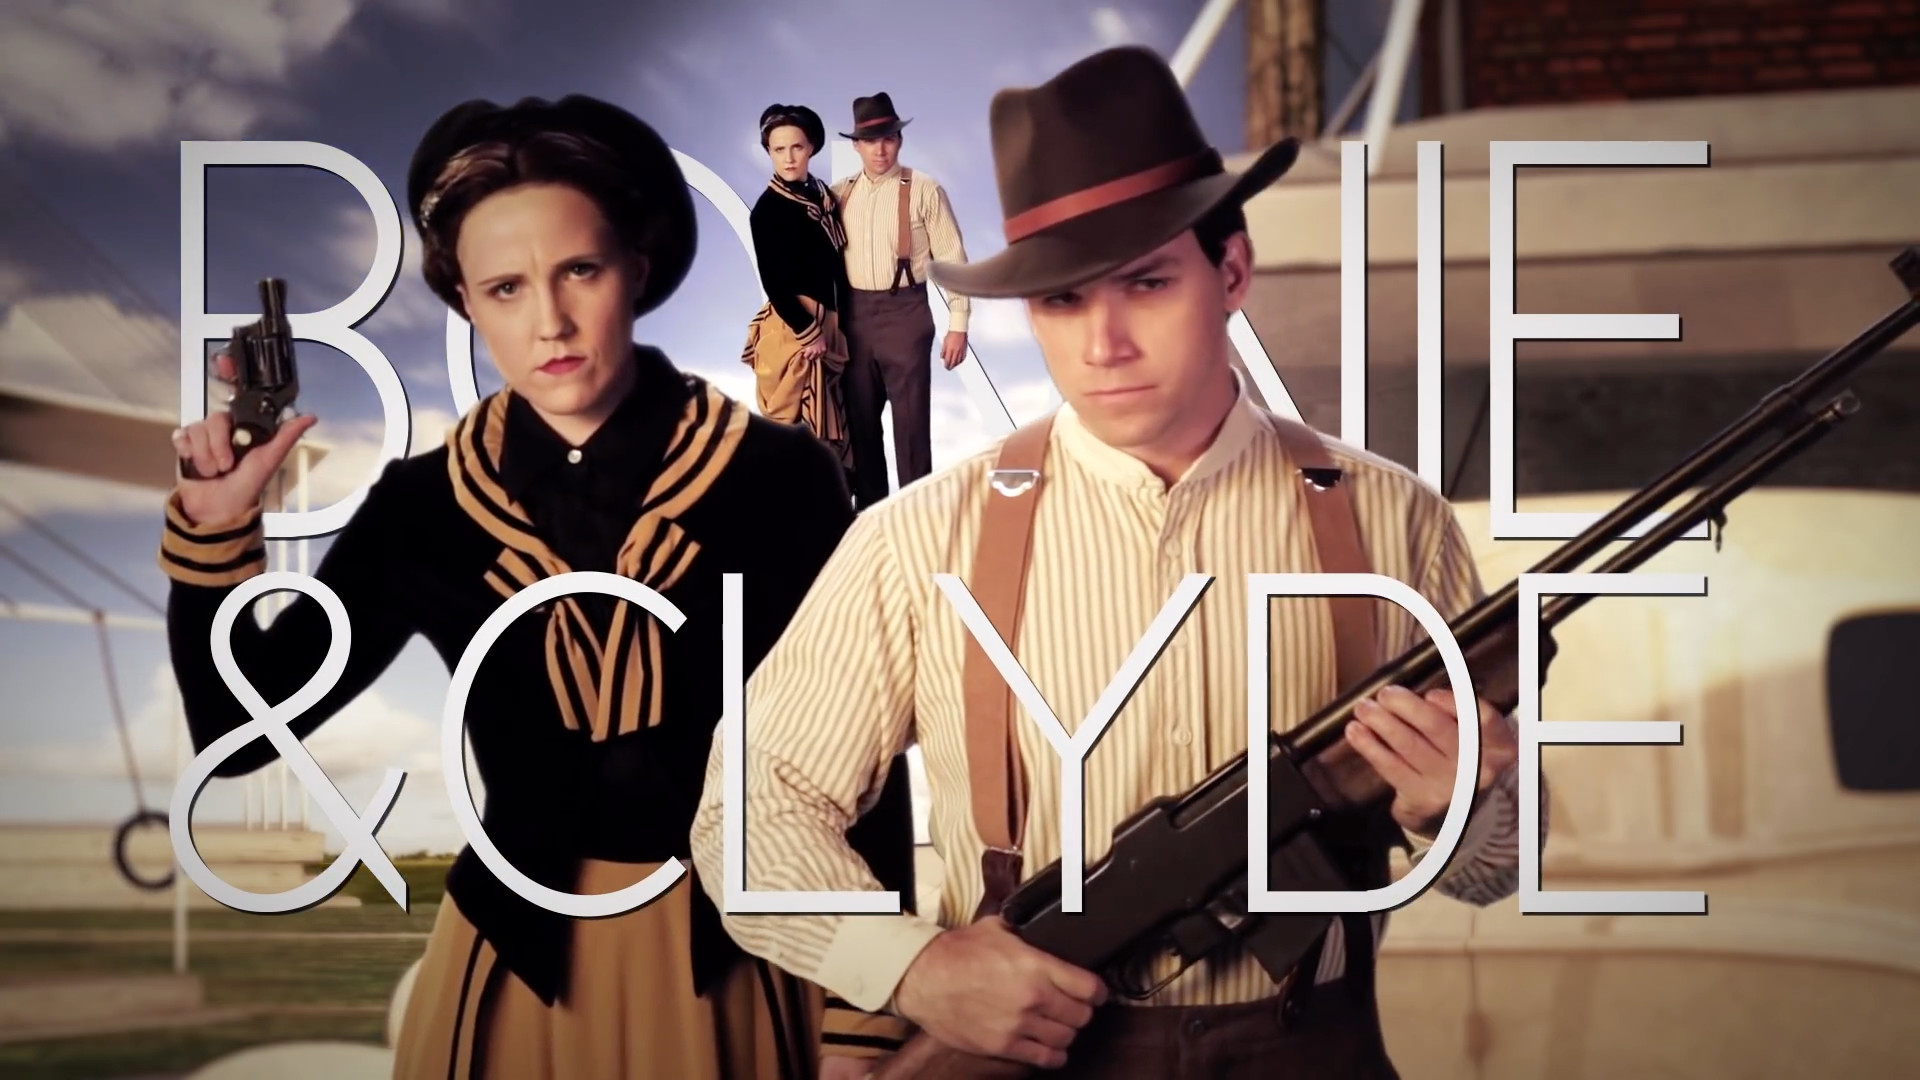 1920x1080 Bonnie & Clyde | Epic Rap Battles of History Wiki | FANDOM powered by Wikia